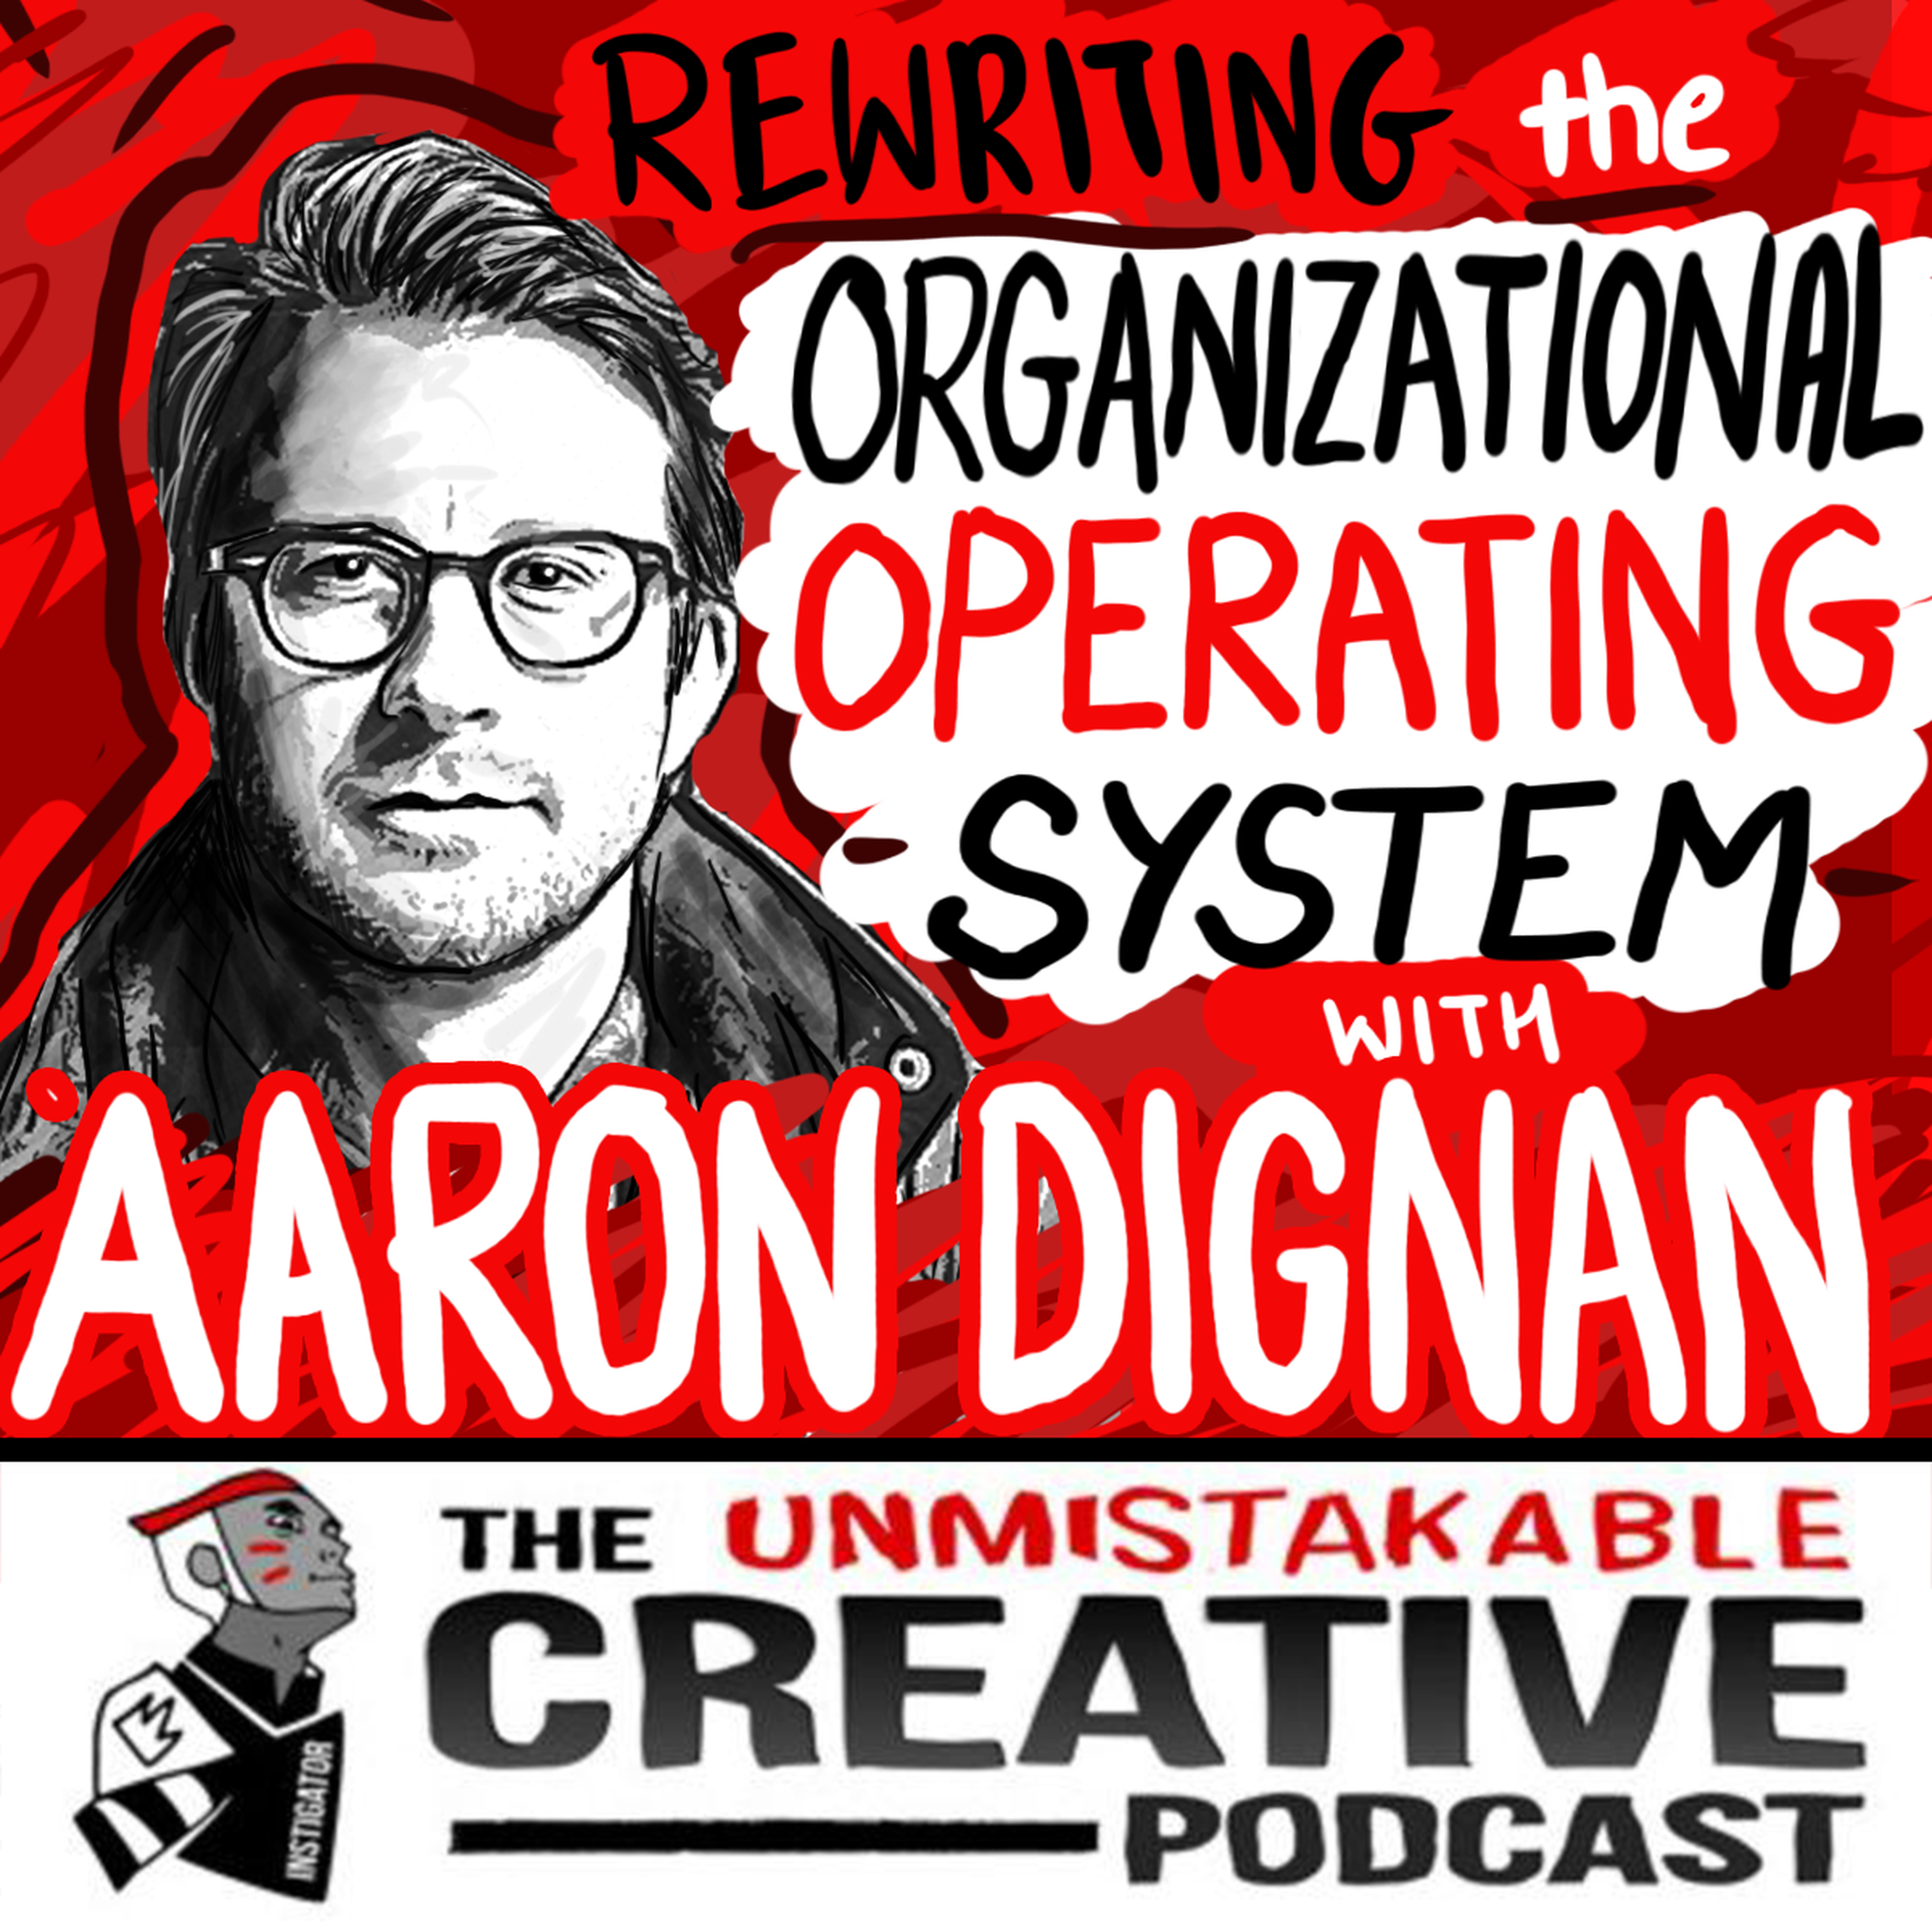 Rewriting The Organizational Operating System with Aaron Dignan Image